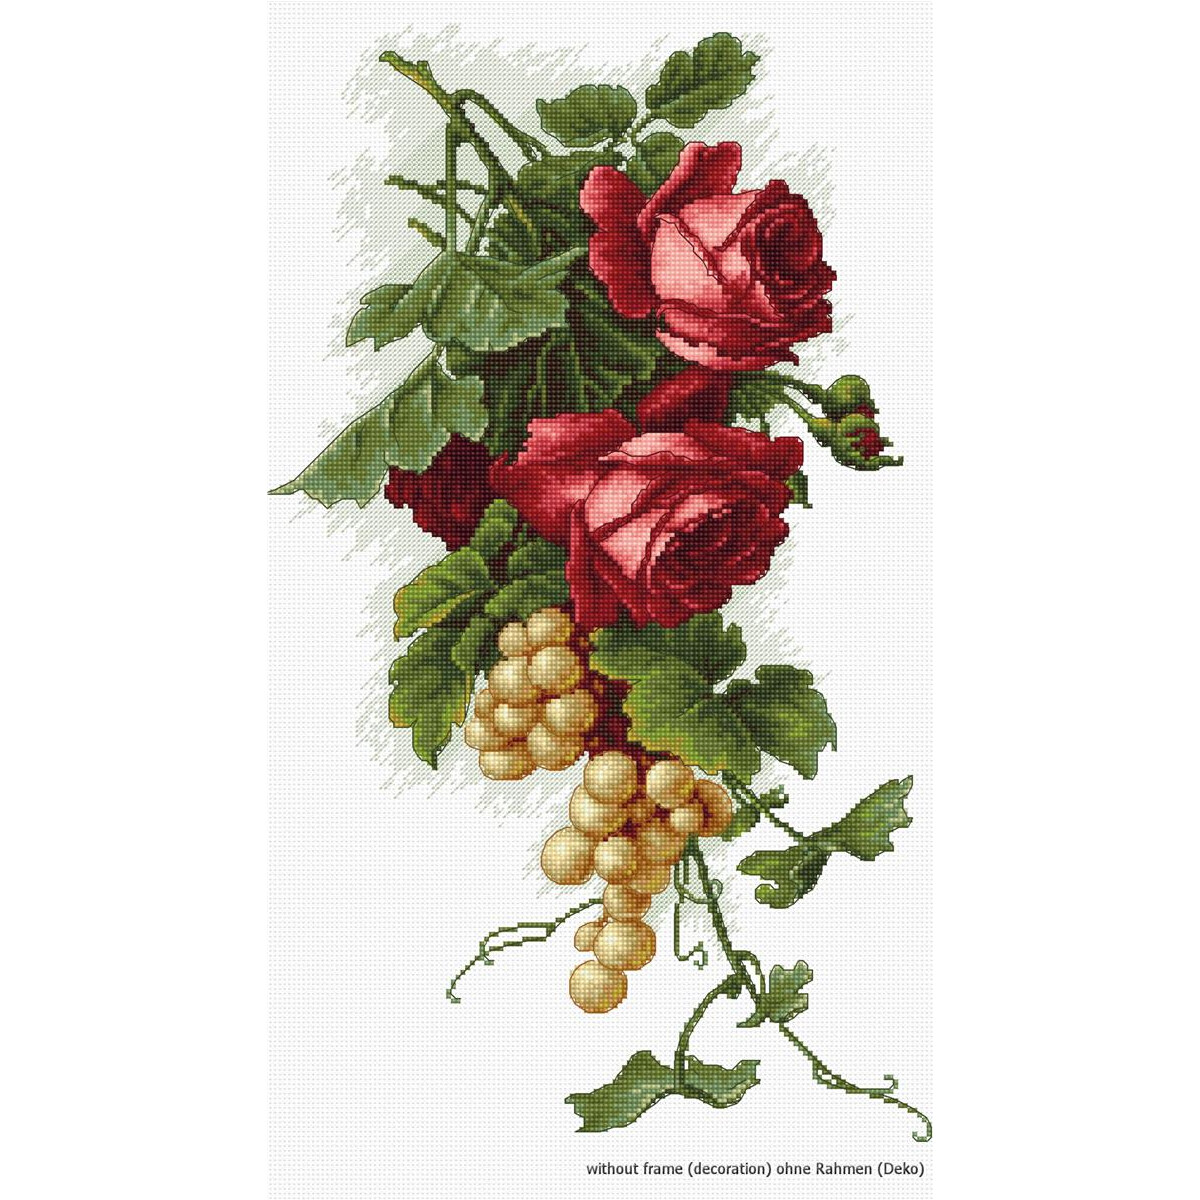 Luca-S counted Cross Stitch kit "Red roses and...